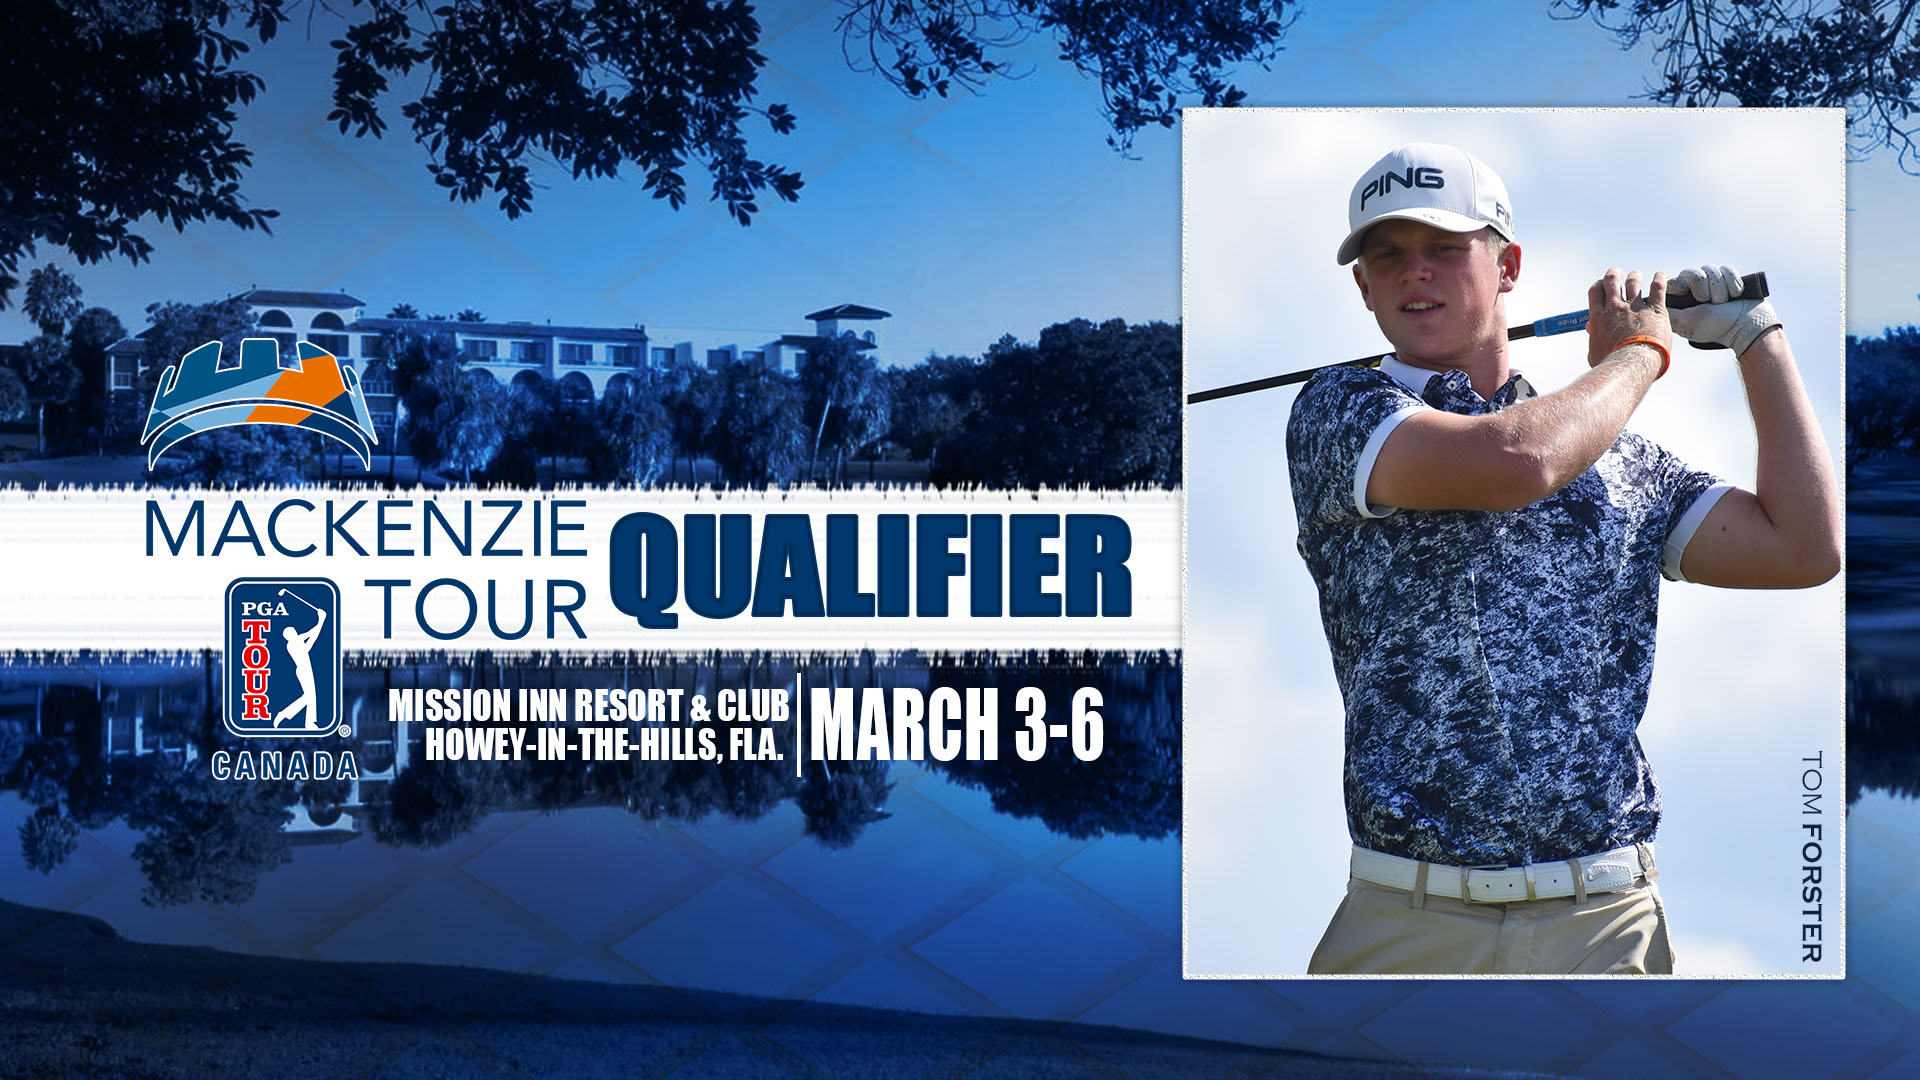 Forster set to play in Mackenzie Tour qualifier